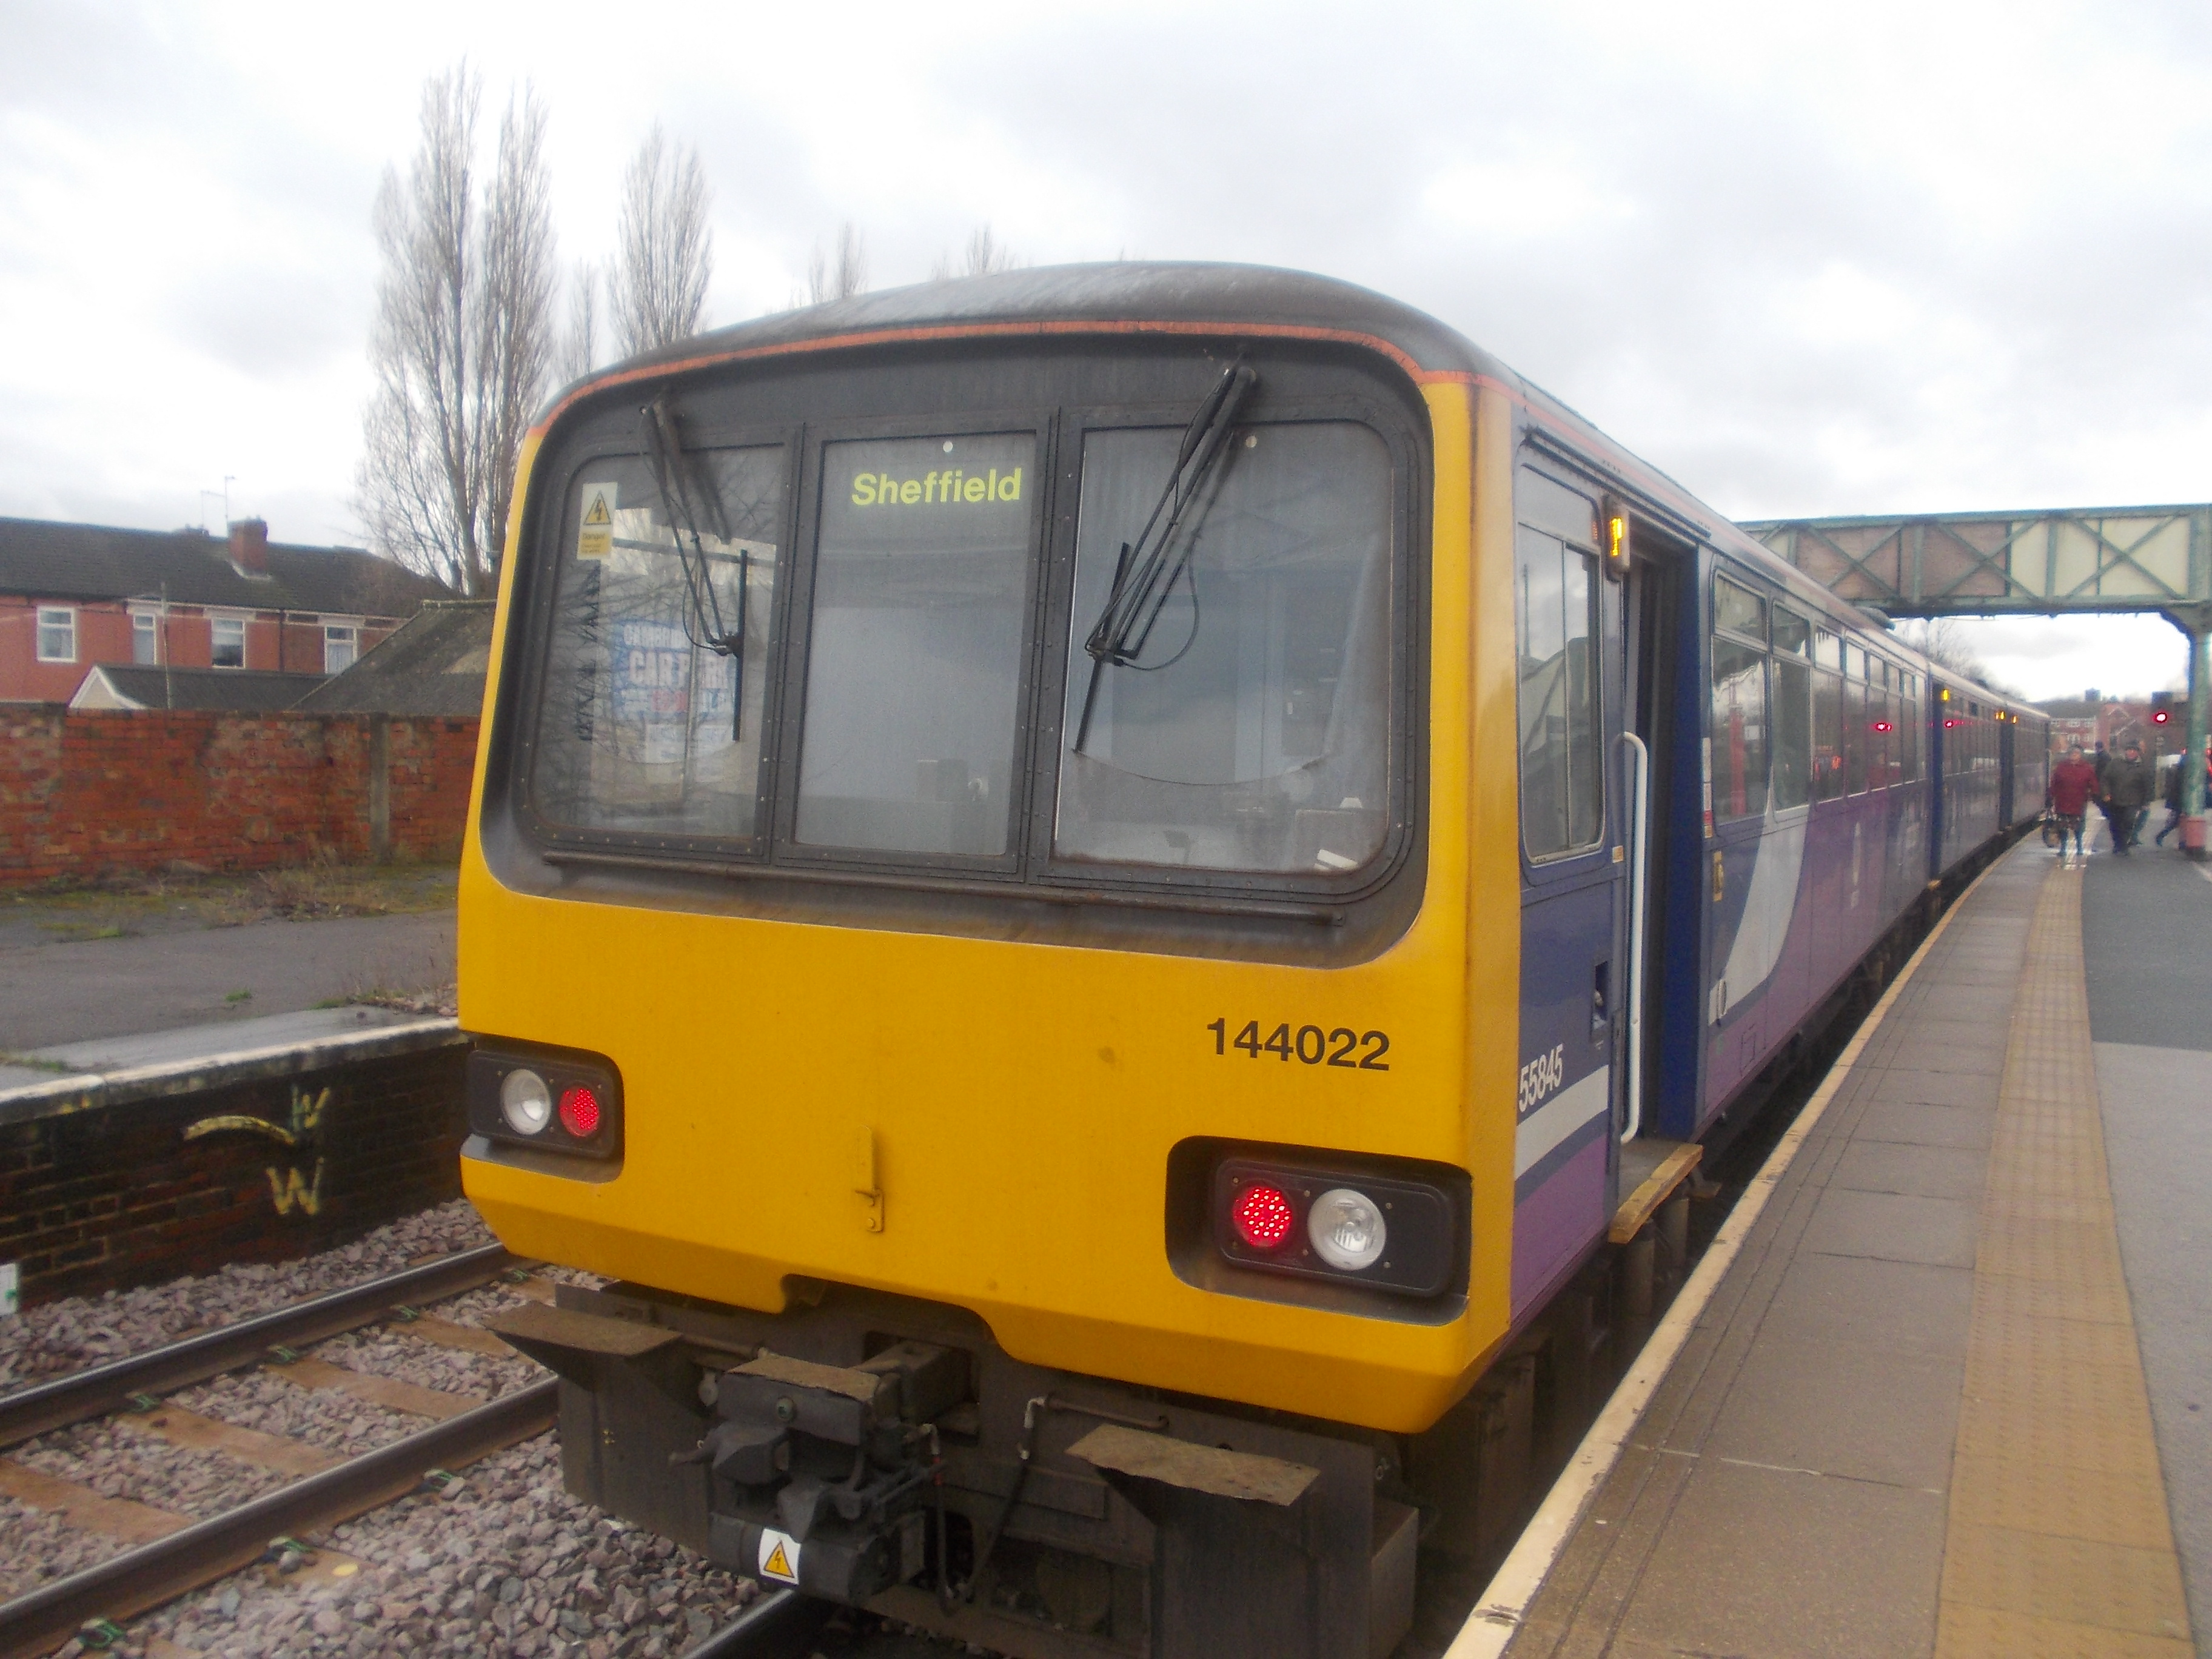 144022 at Castleford. I took a picture here rather than at Leeds because me and Paul were cutting it a little fine for making it on at Leeds. This was